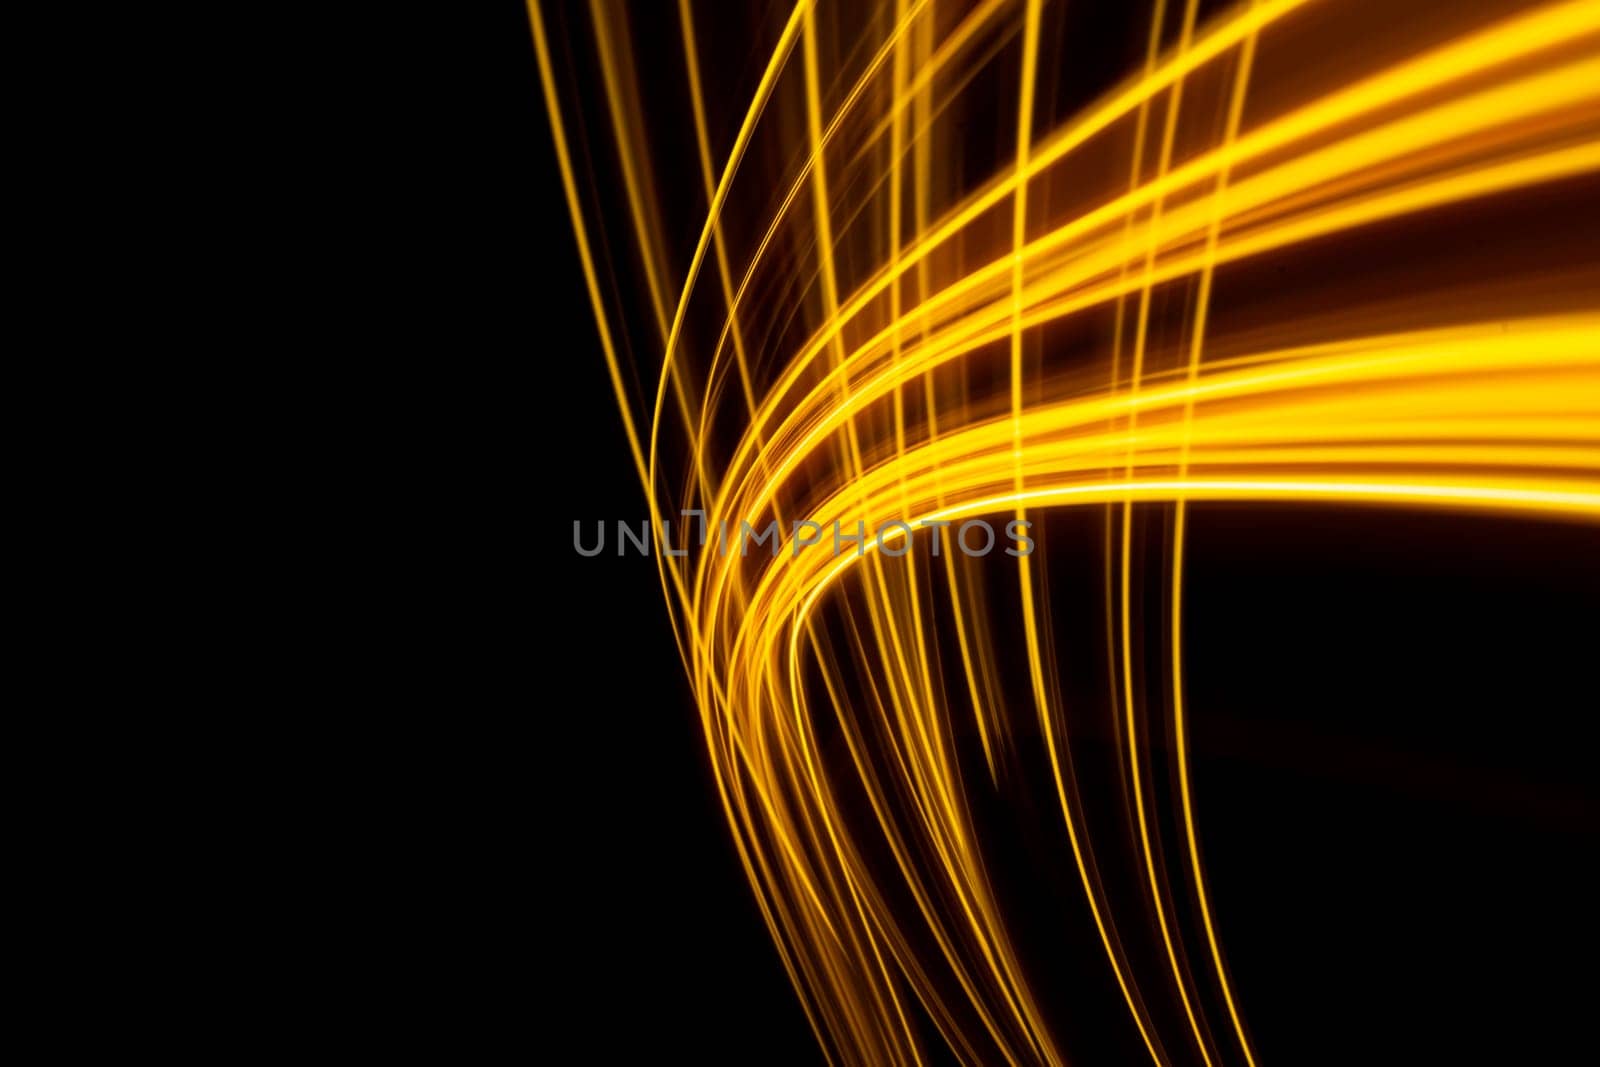 Long exposure photo capturing an electric yellow light trail on a dark background by PaulCarr